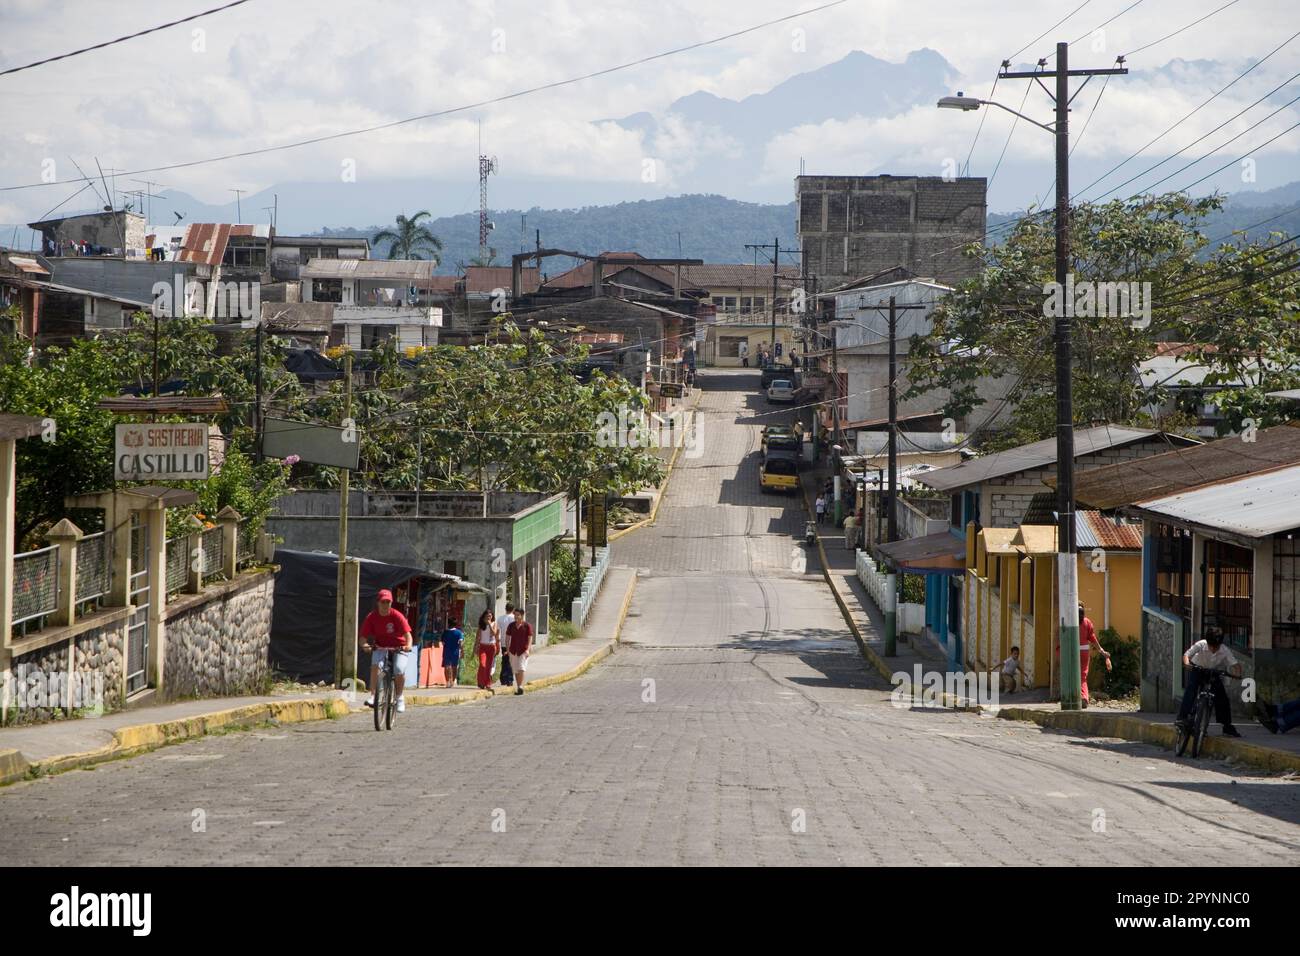 A street in the town of Shell, also known as Shell Mera in the Eastern region of the Ecuadorian Amazon, Ecuador, South America Stock Photo